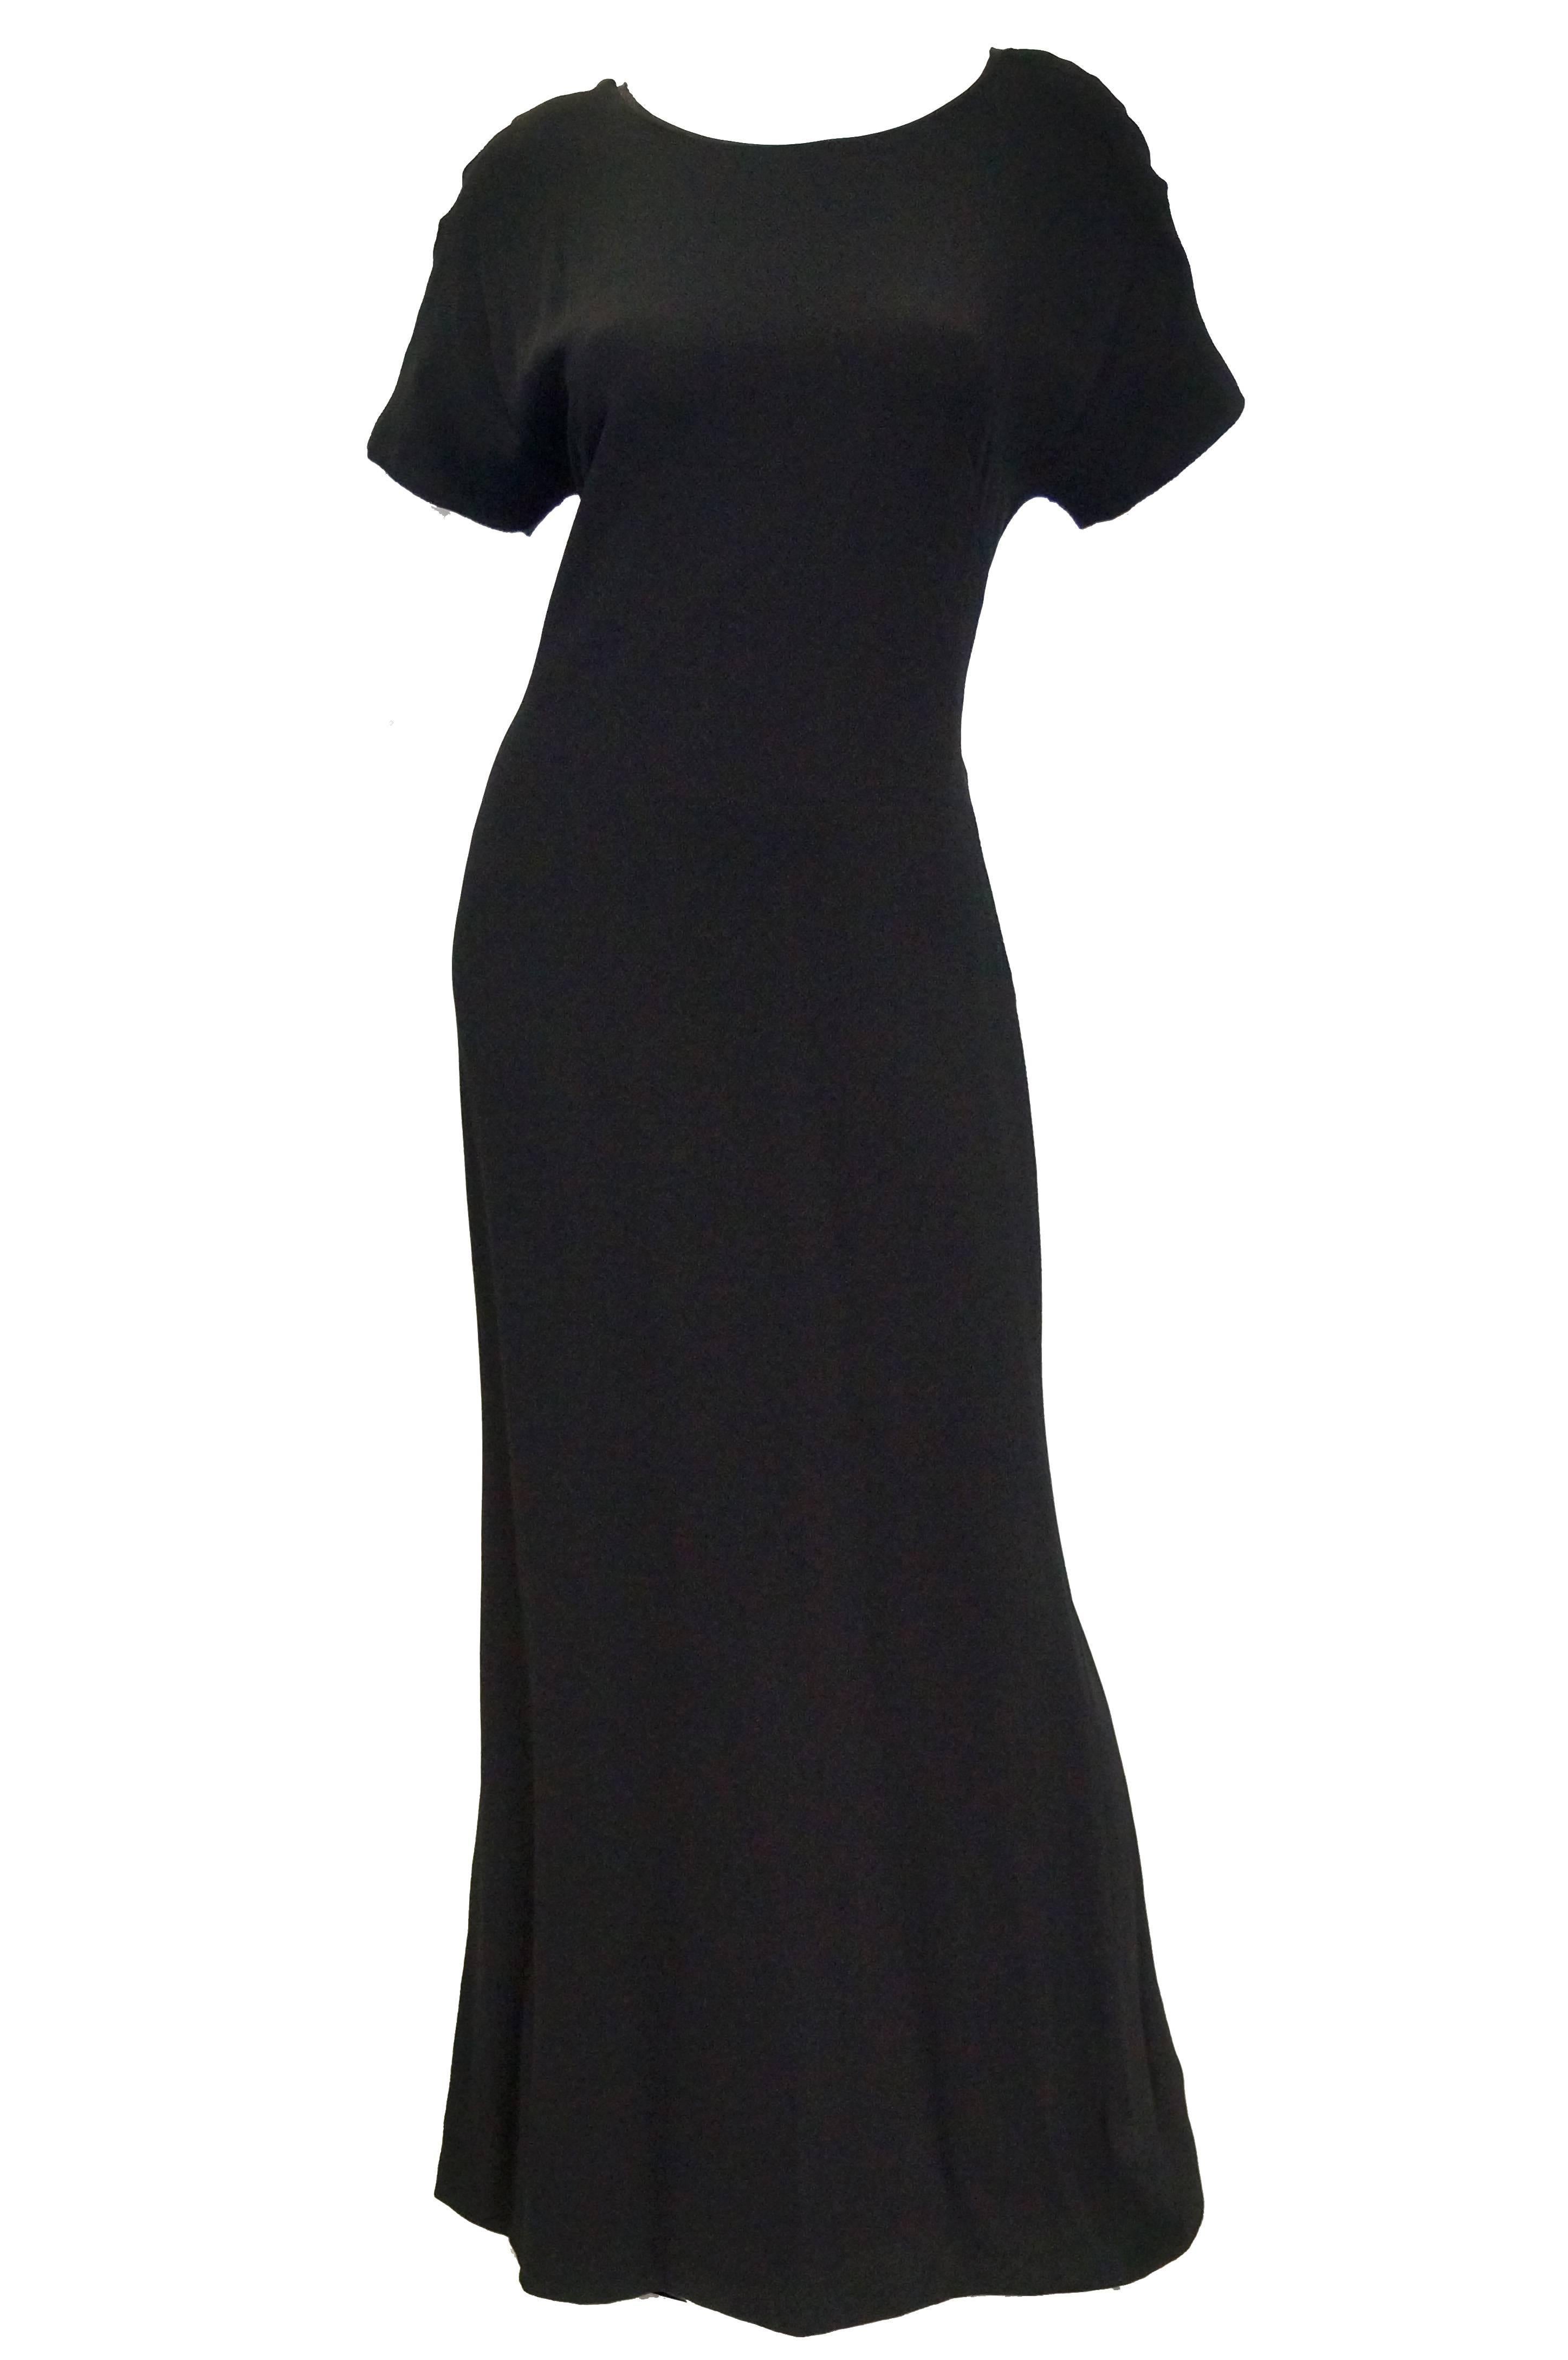 Carolina Herrera new with tags Gorgeous classic dress with a daring twist! This Carolina Herrera maxi length evening dress features a loose a - line silhouette, short sleeves ( in a very 1940s batwing cut ), a high bateau - like neckline, and an